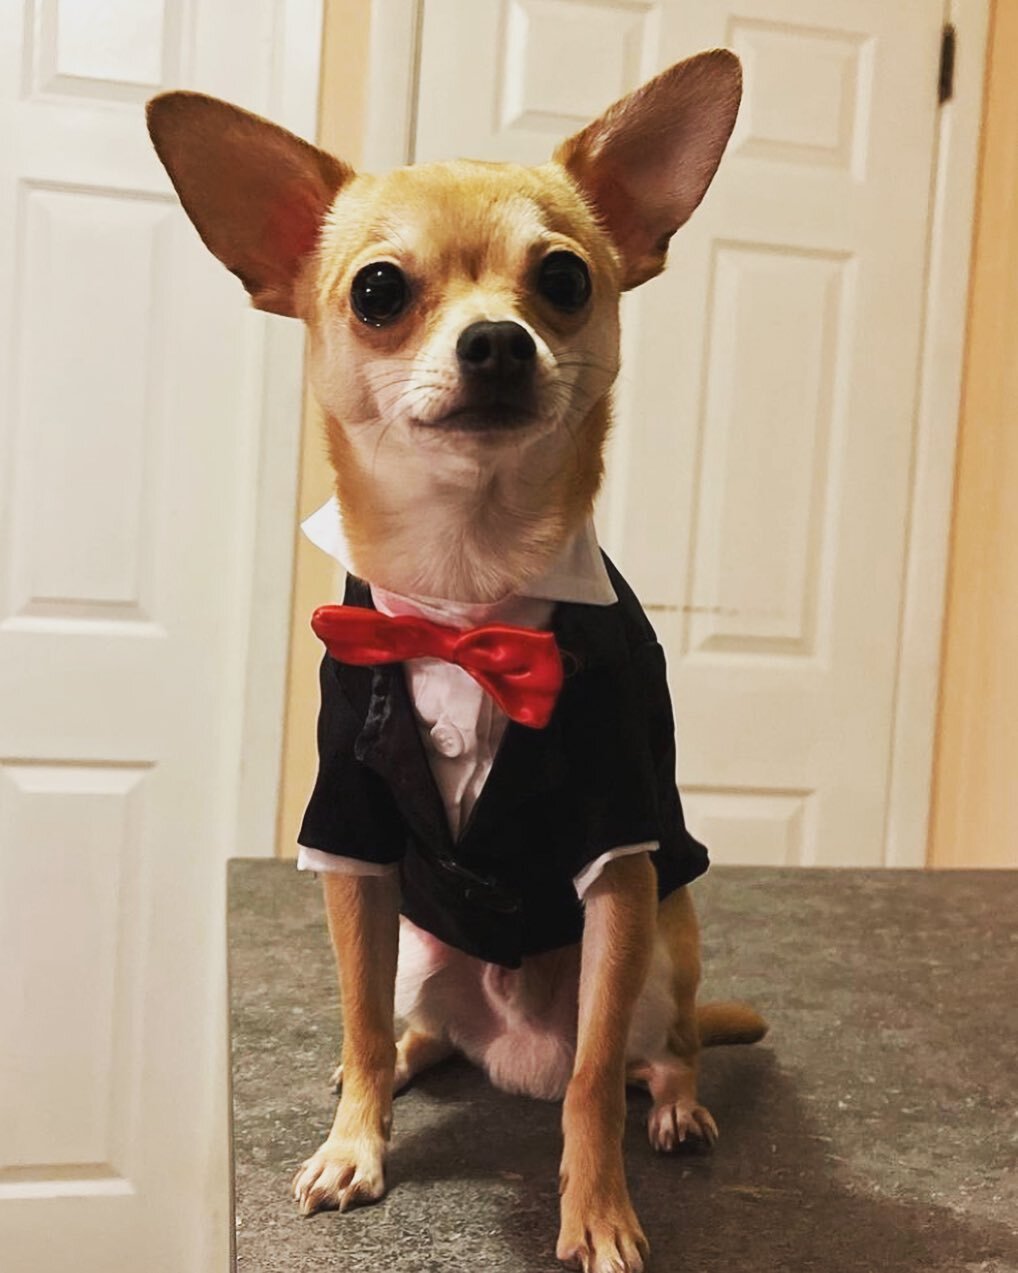 What&rsquo;s up everybody, it&rsquo;s Rufus here! I am a dapper gentleman who knows that tuxedos are the perfect attire for house calls with my vet. 

My outlook on life is that you can always feel good with your bow tie straight and your anal glands